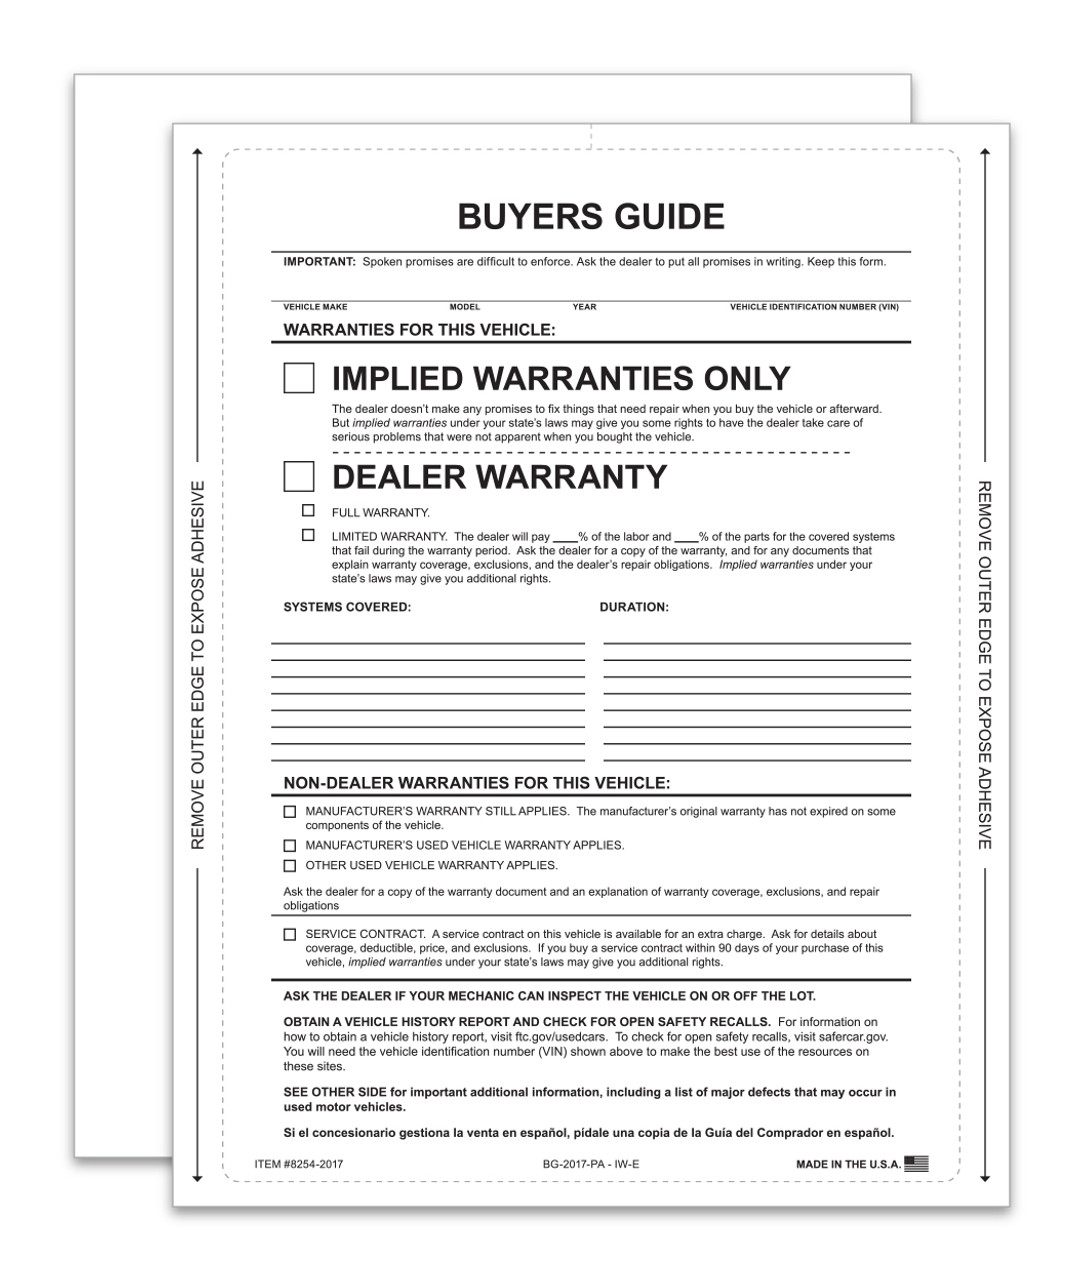 Interior Buyers Guide - Implied Warranty - P/A - Qty. 100